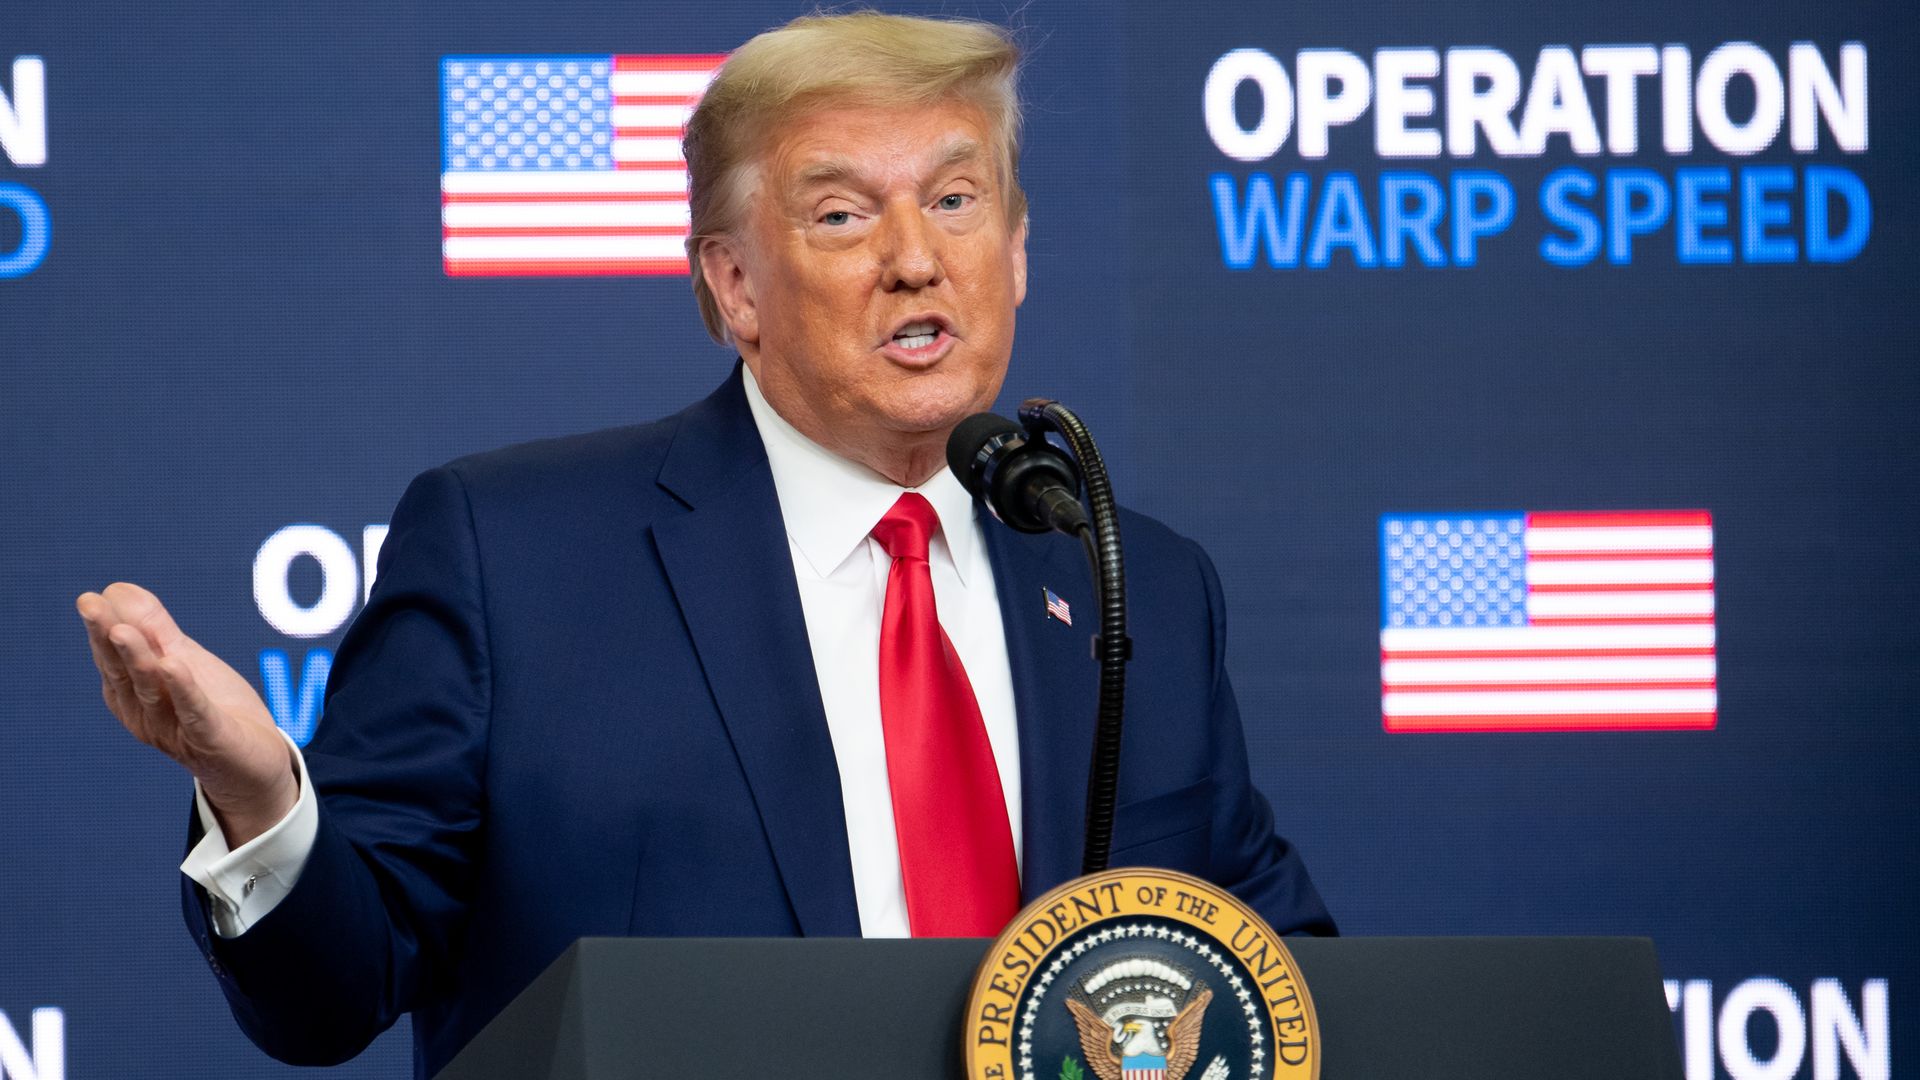 President Donald Trump speaks during the Operation Warp Speed Vaccine Summit in the Eisenhower Executive Office Building adjacent to the White House